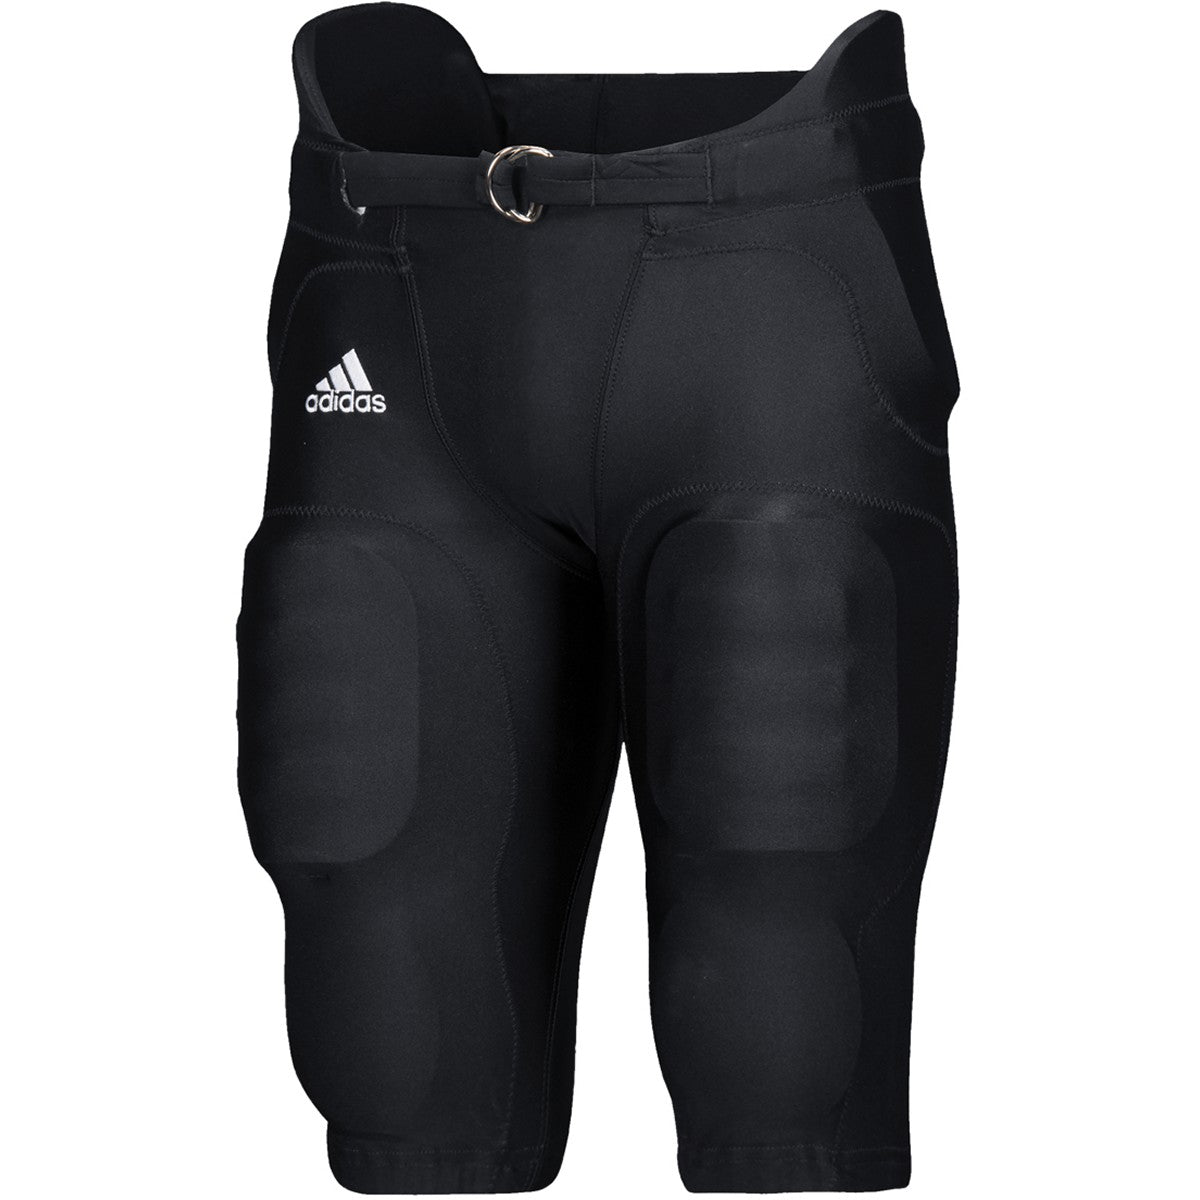 adidas Men's Integrated Football Pants with Pads League Outfitters